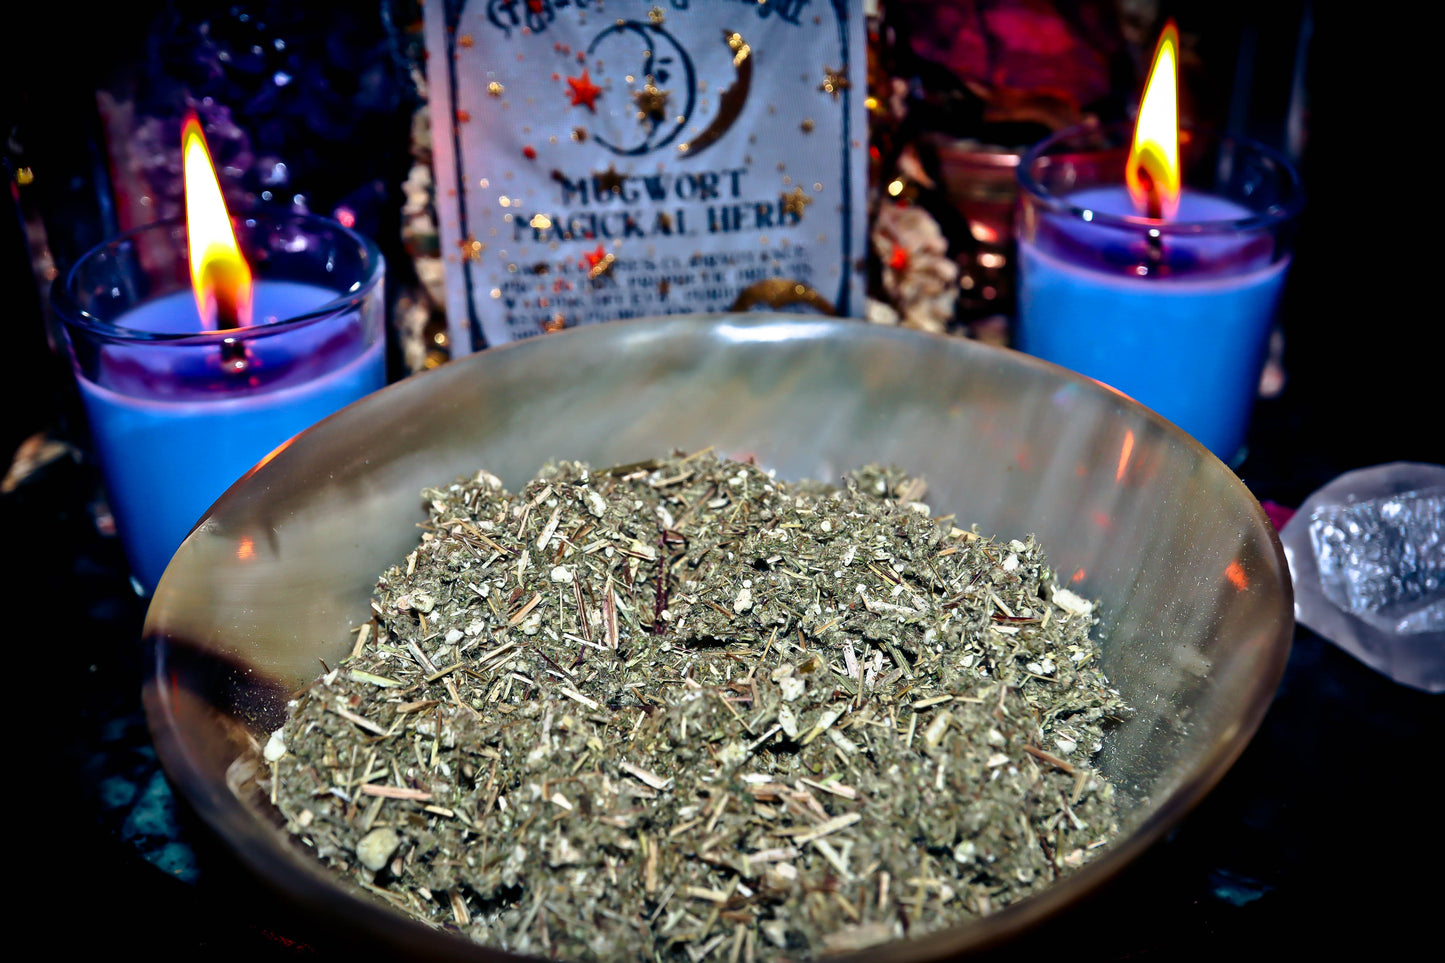 MUGWORT Magickal Herb Apothecary Dried Herb for 3rd Eye Awakening, Clairvoyance, Protection & More!